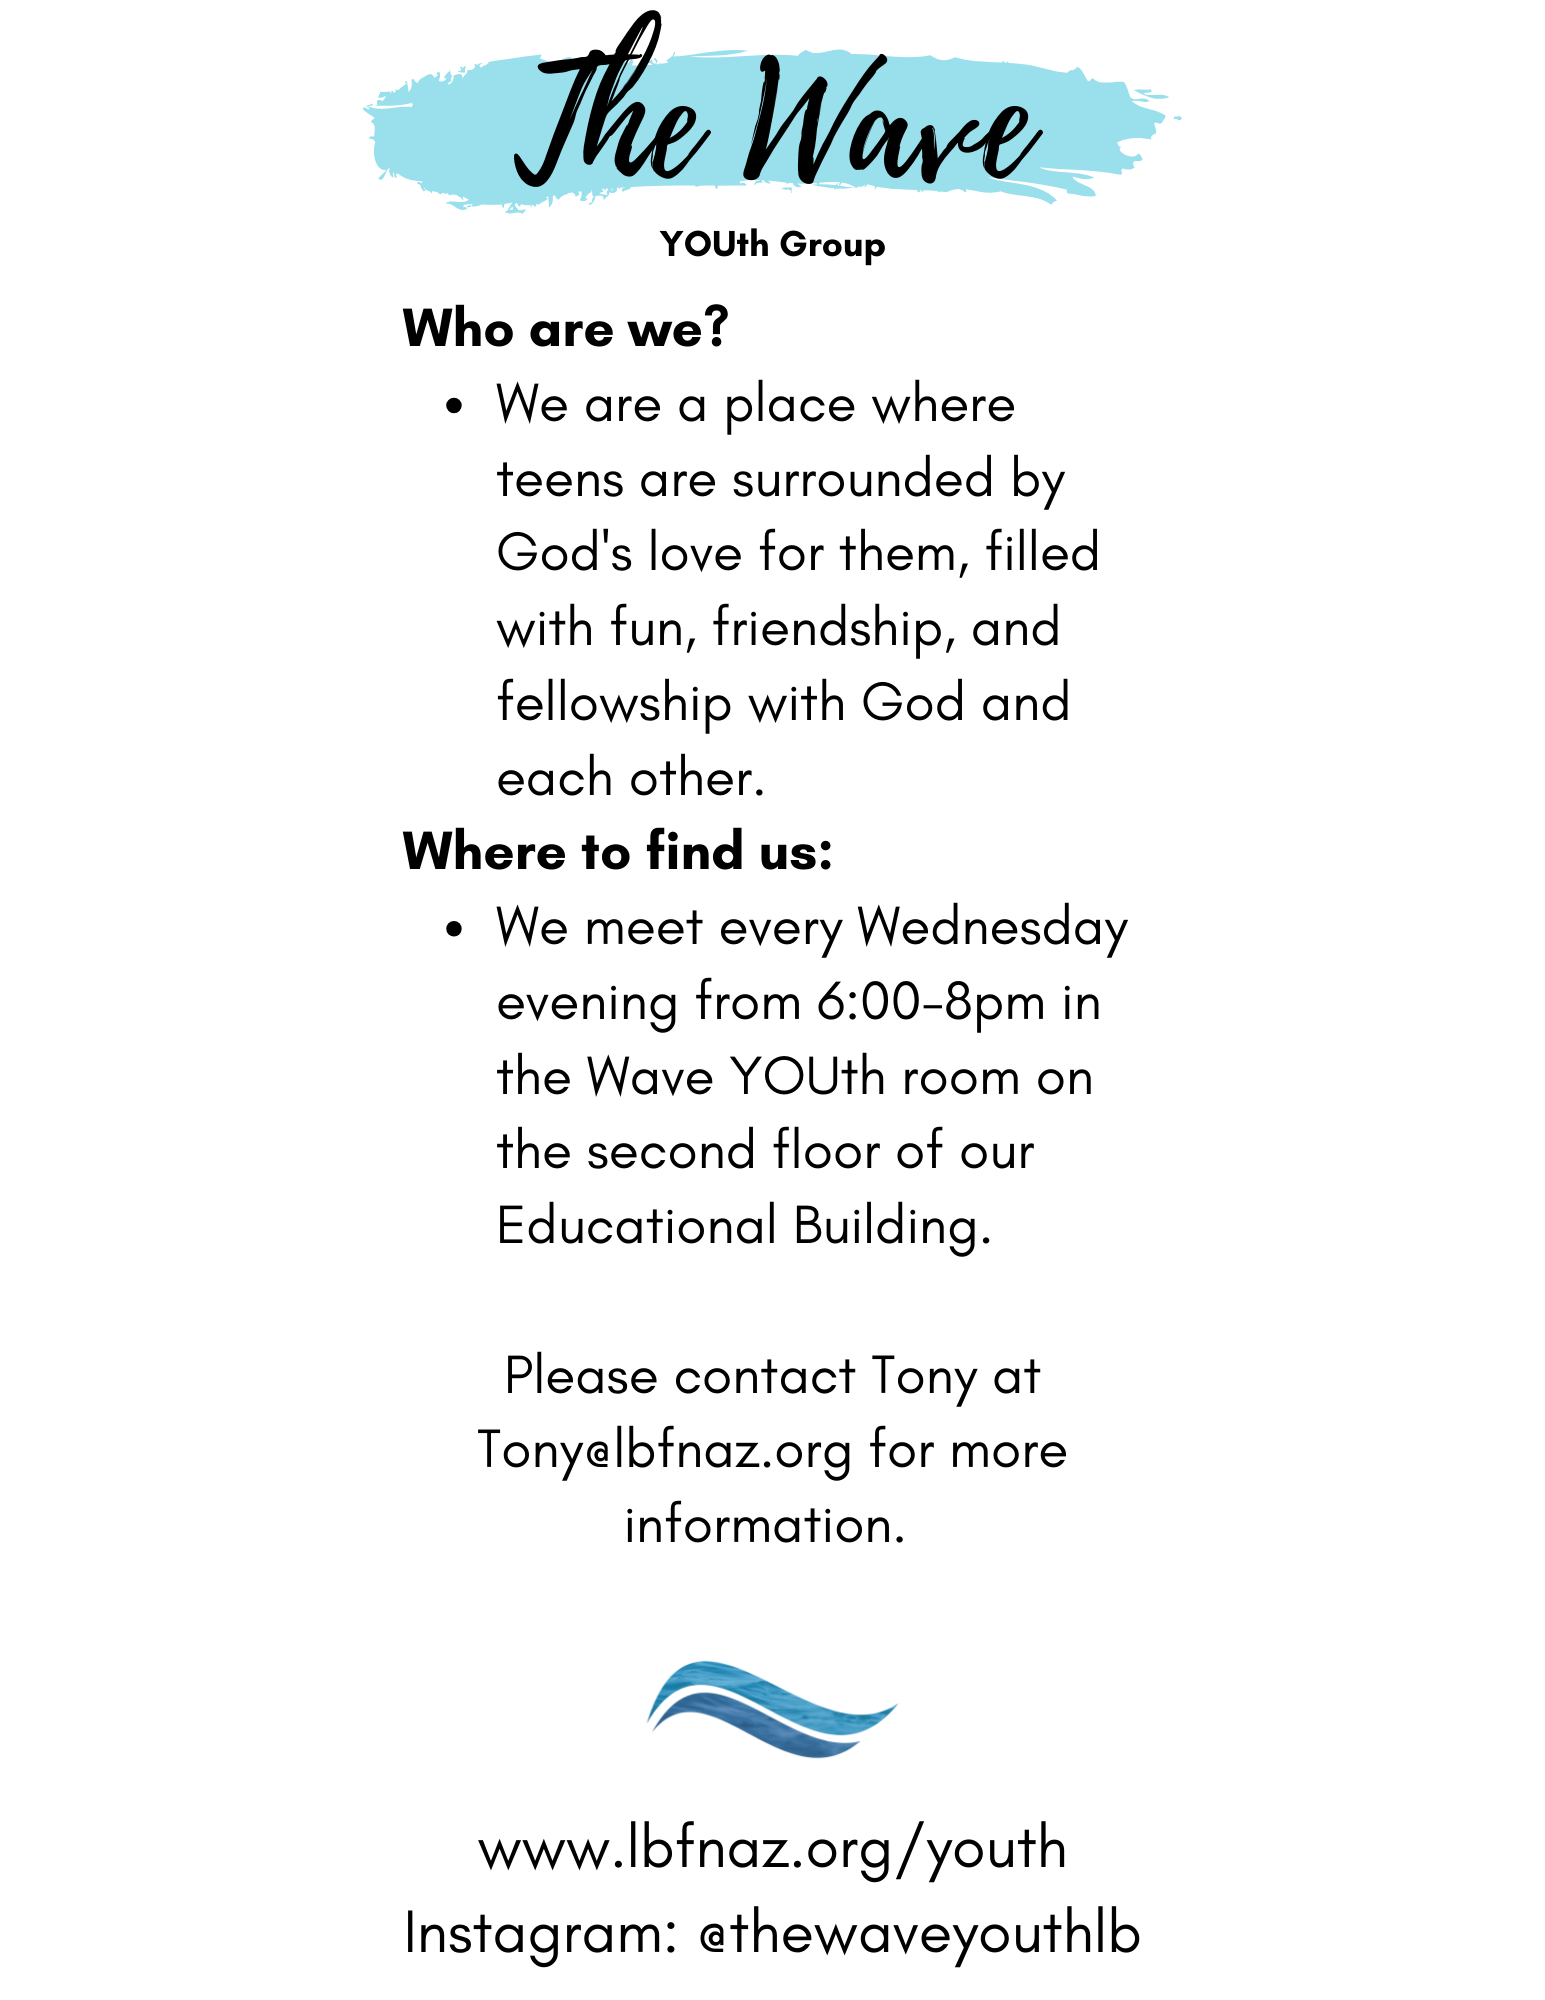 website ministry image - The Wave.png